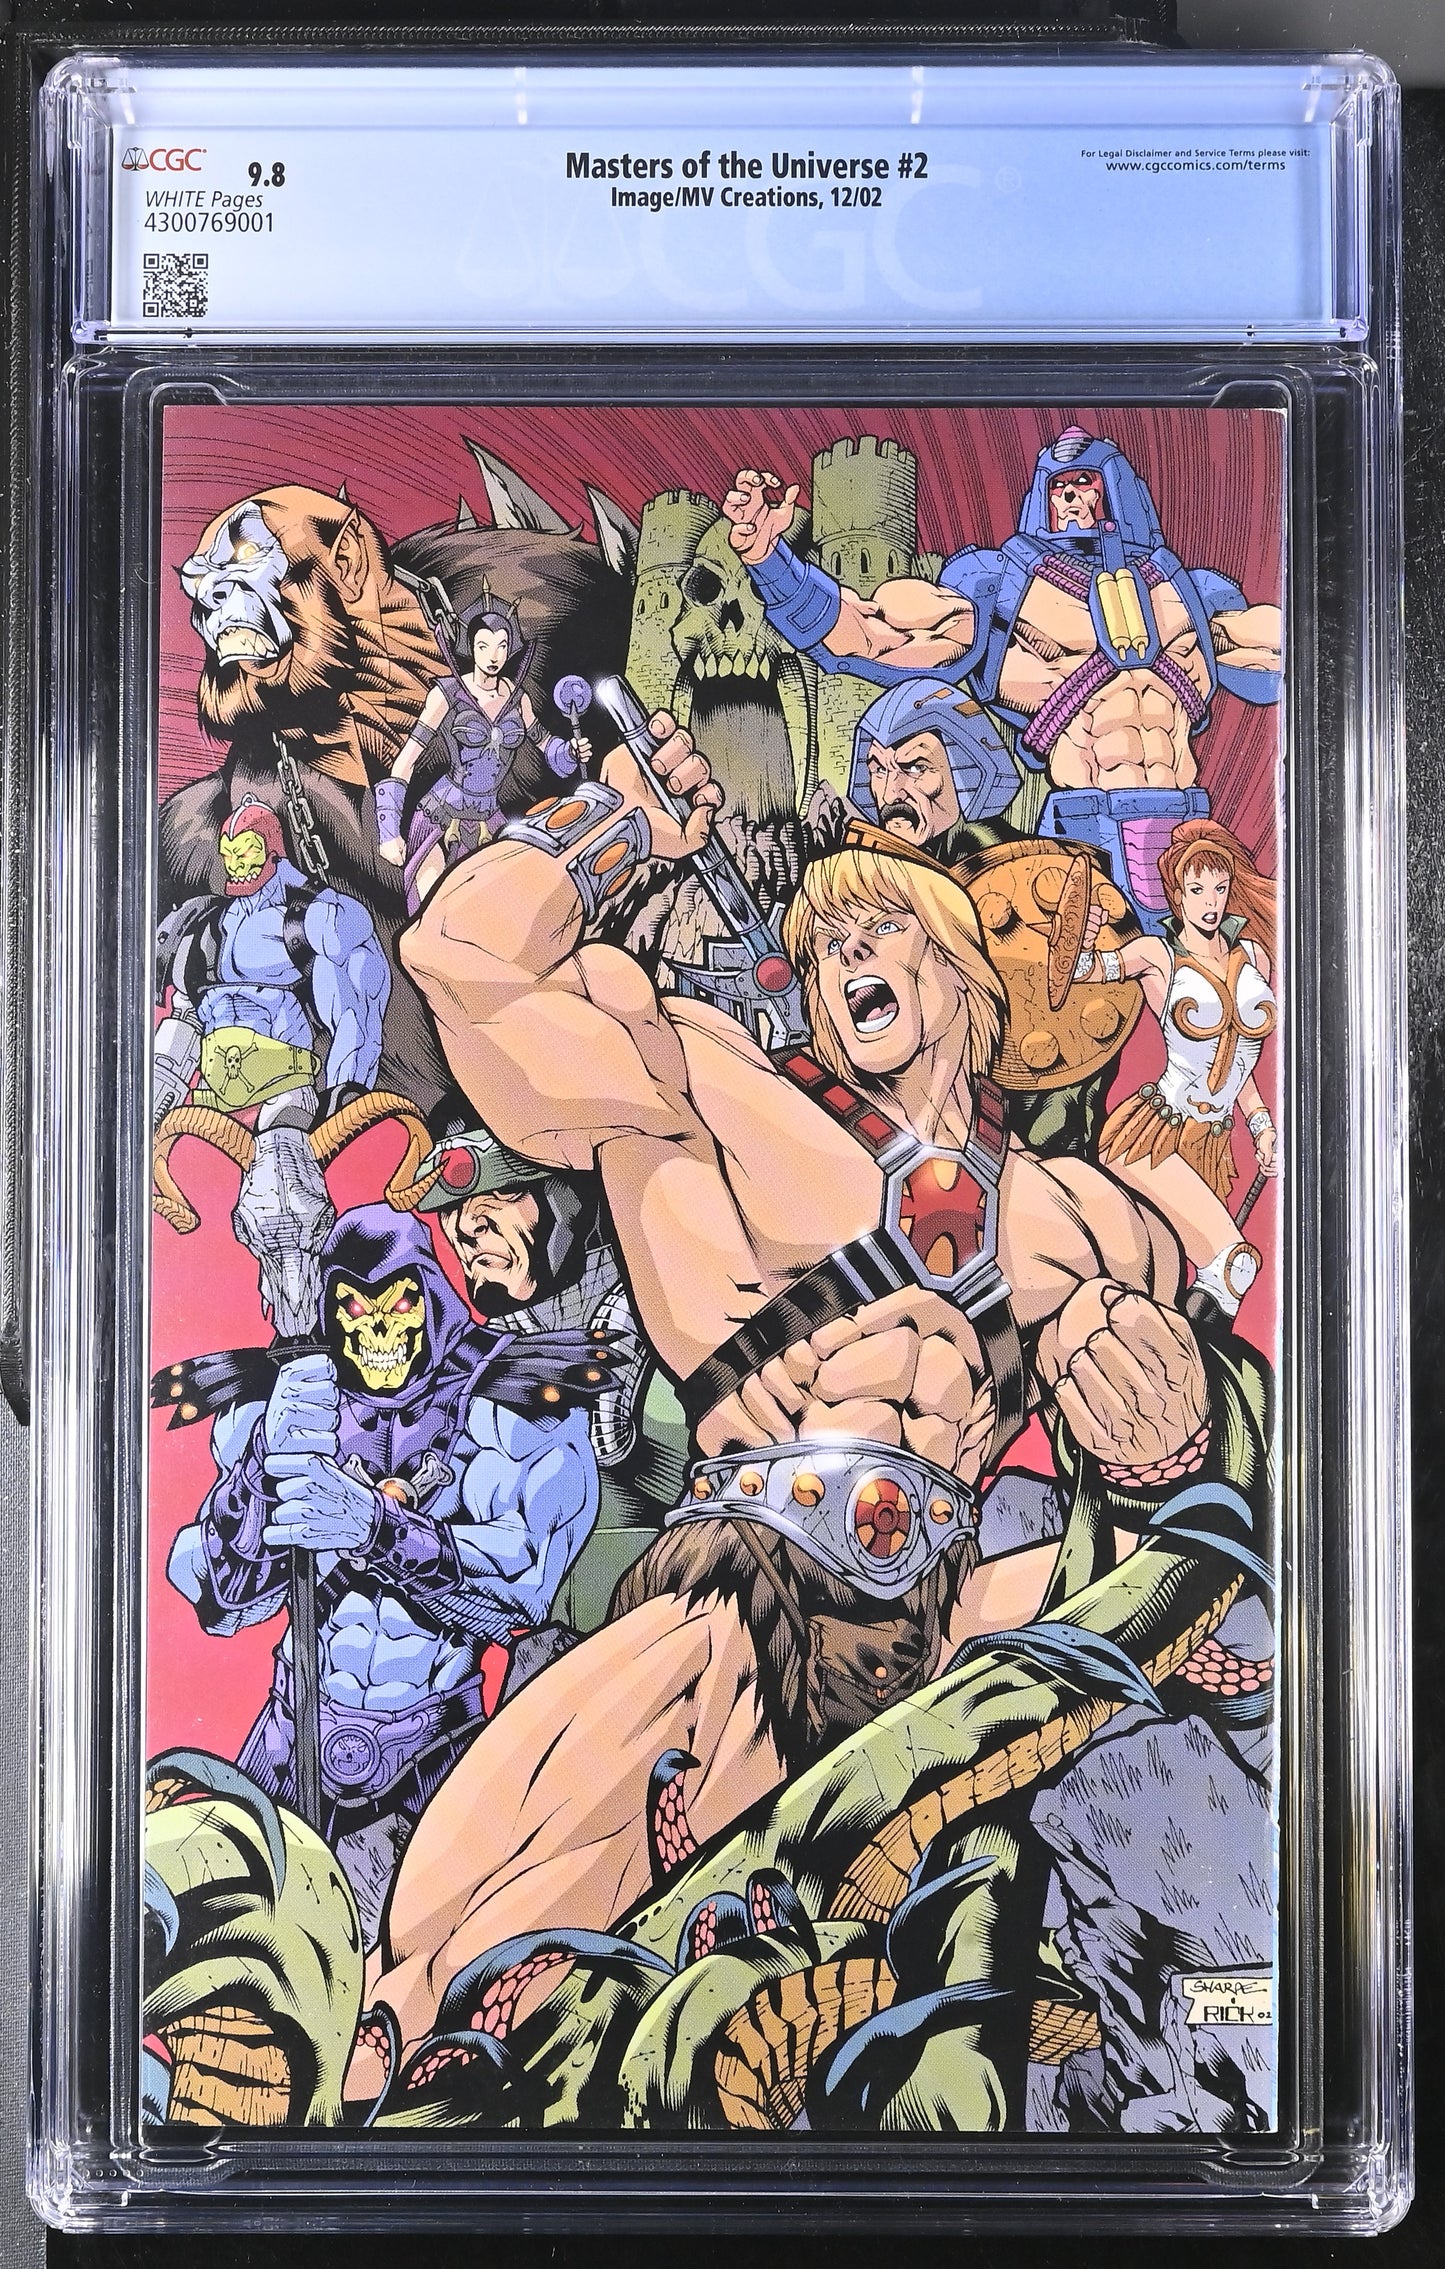 2002 Masters of the Universe #2 Cover A Image/MV Creations CGC 9.2 POP 5